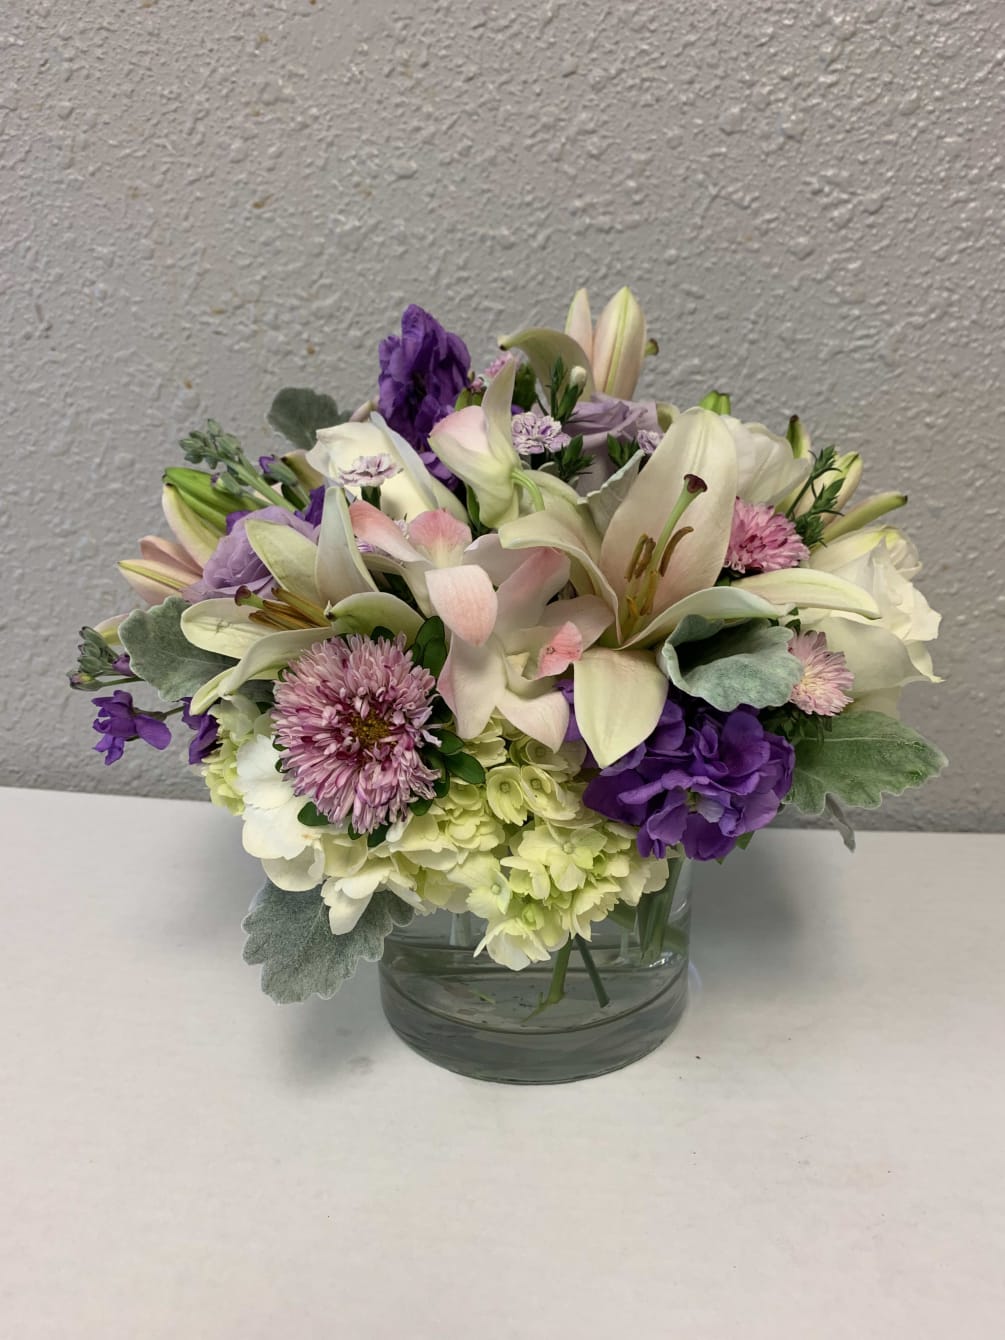 This low and lush beautifully textured arrangement is perfect with its style